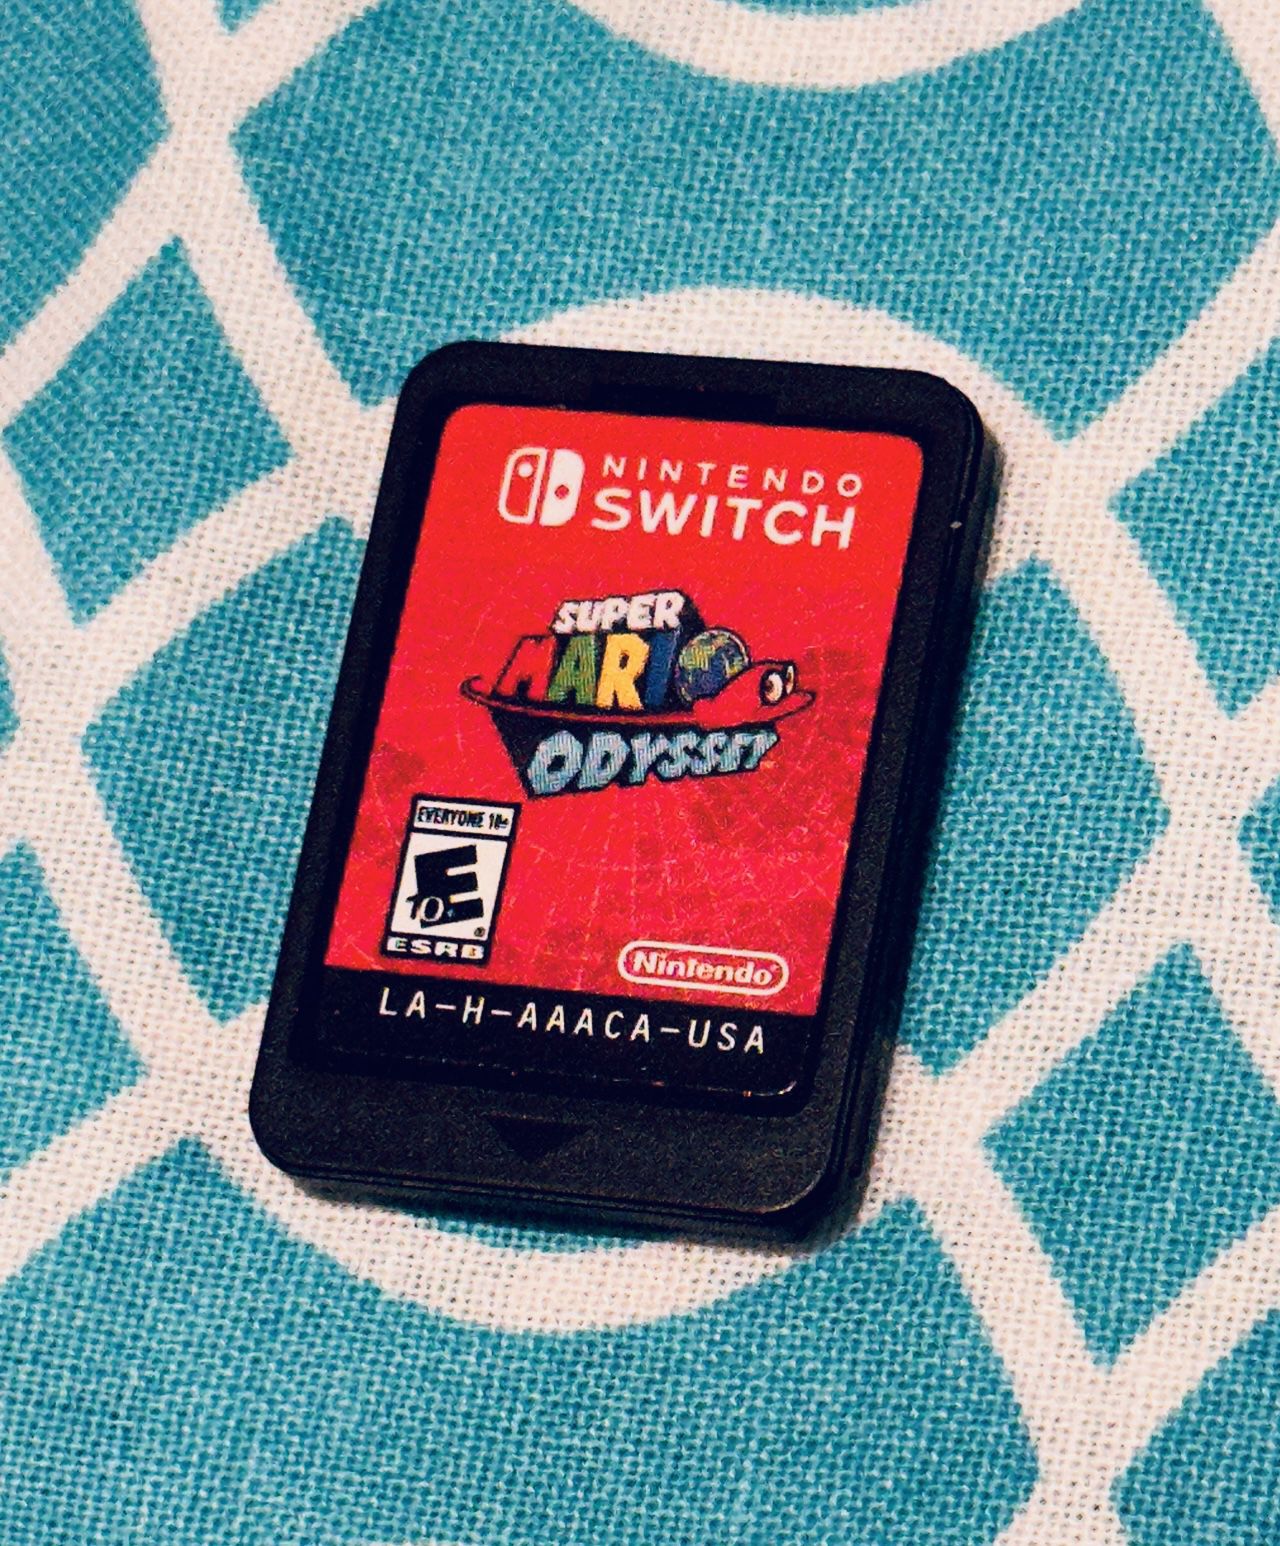 Super Mario Odyssey (Nintendo Switch, 2017) Cartridge Only Tested